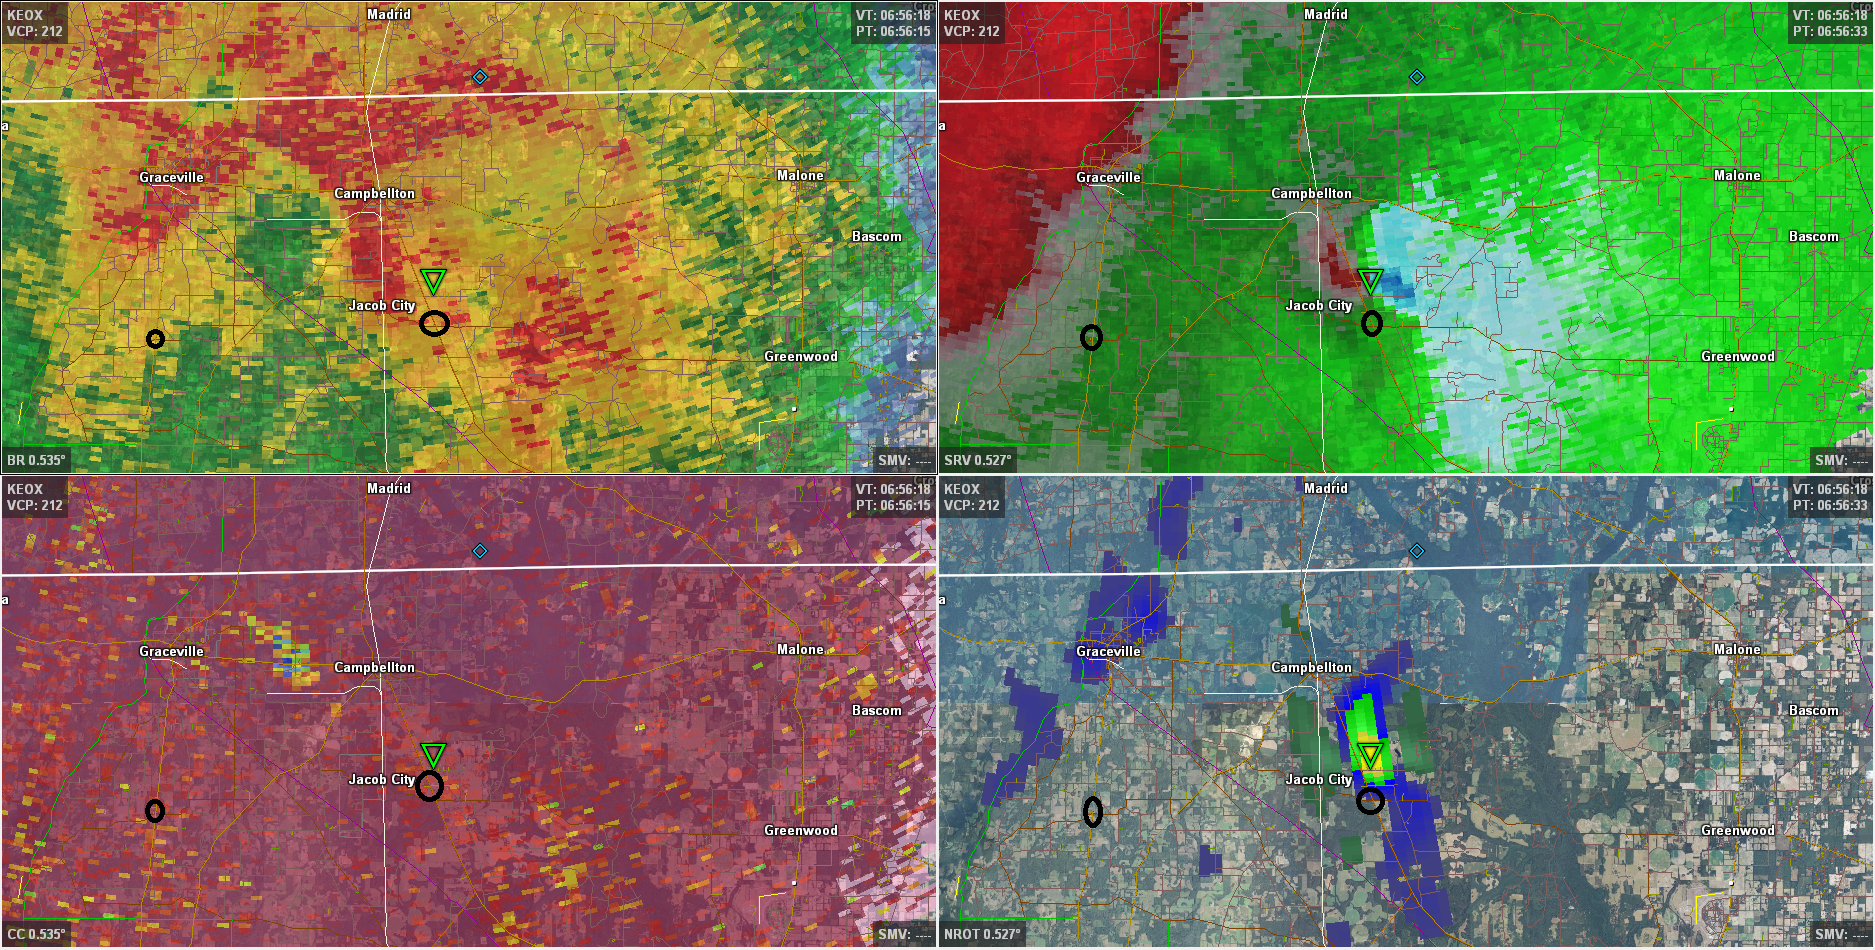 A 4-panel image from the Ft. Rucker, AL (KEOX) radar valid 0656 UTC 30 April 2014. Clockwise from top left, the images depict base reflectivity, storm-relative velocity, rotational velocity and correlation coefficient, all on the 0.5-degree slice. Damage areas are indicated by the black circles.